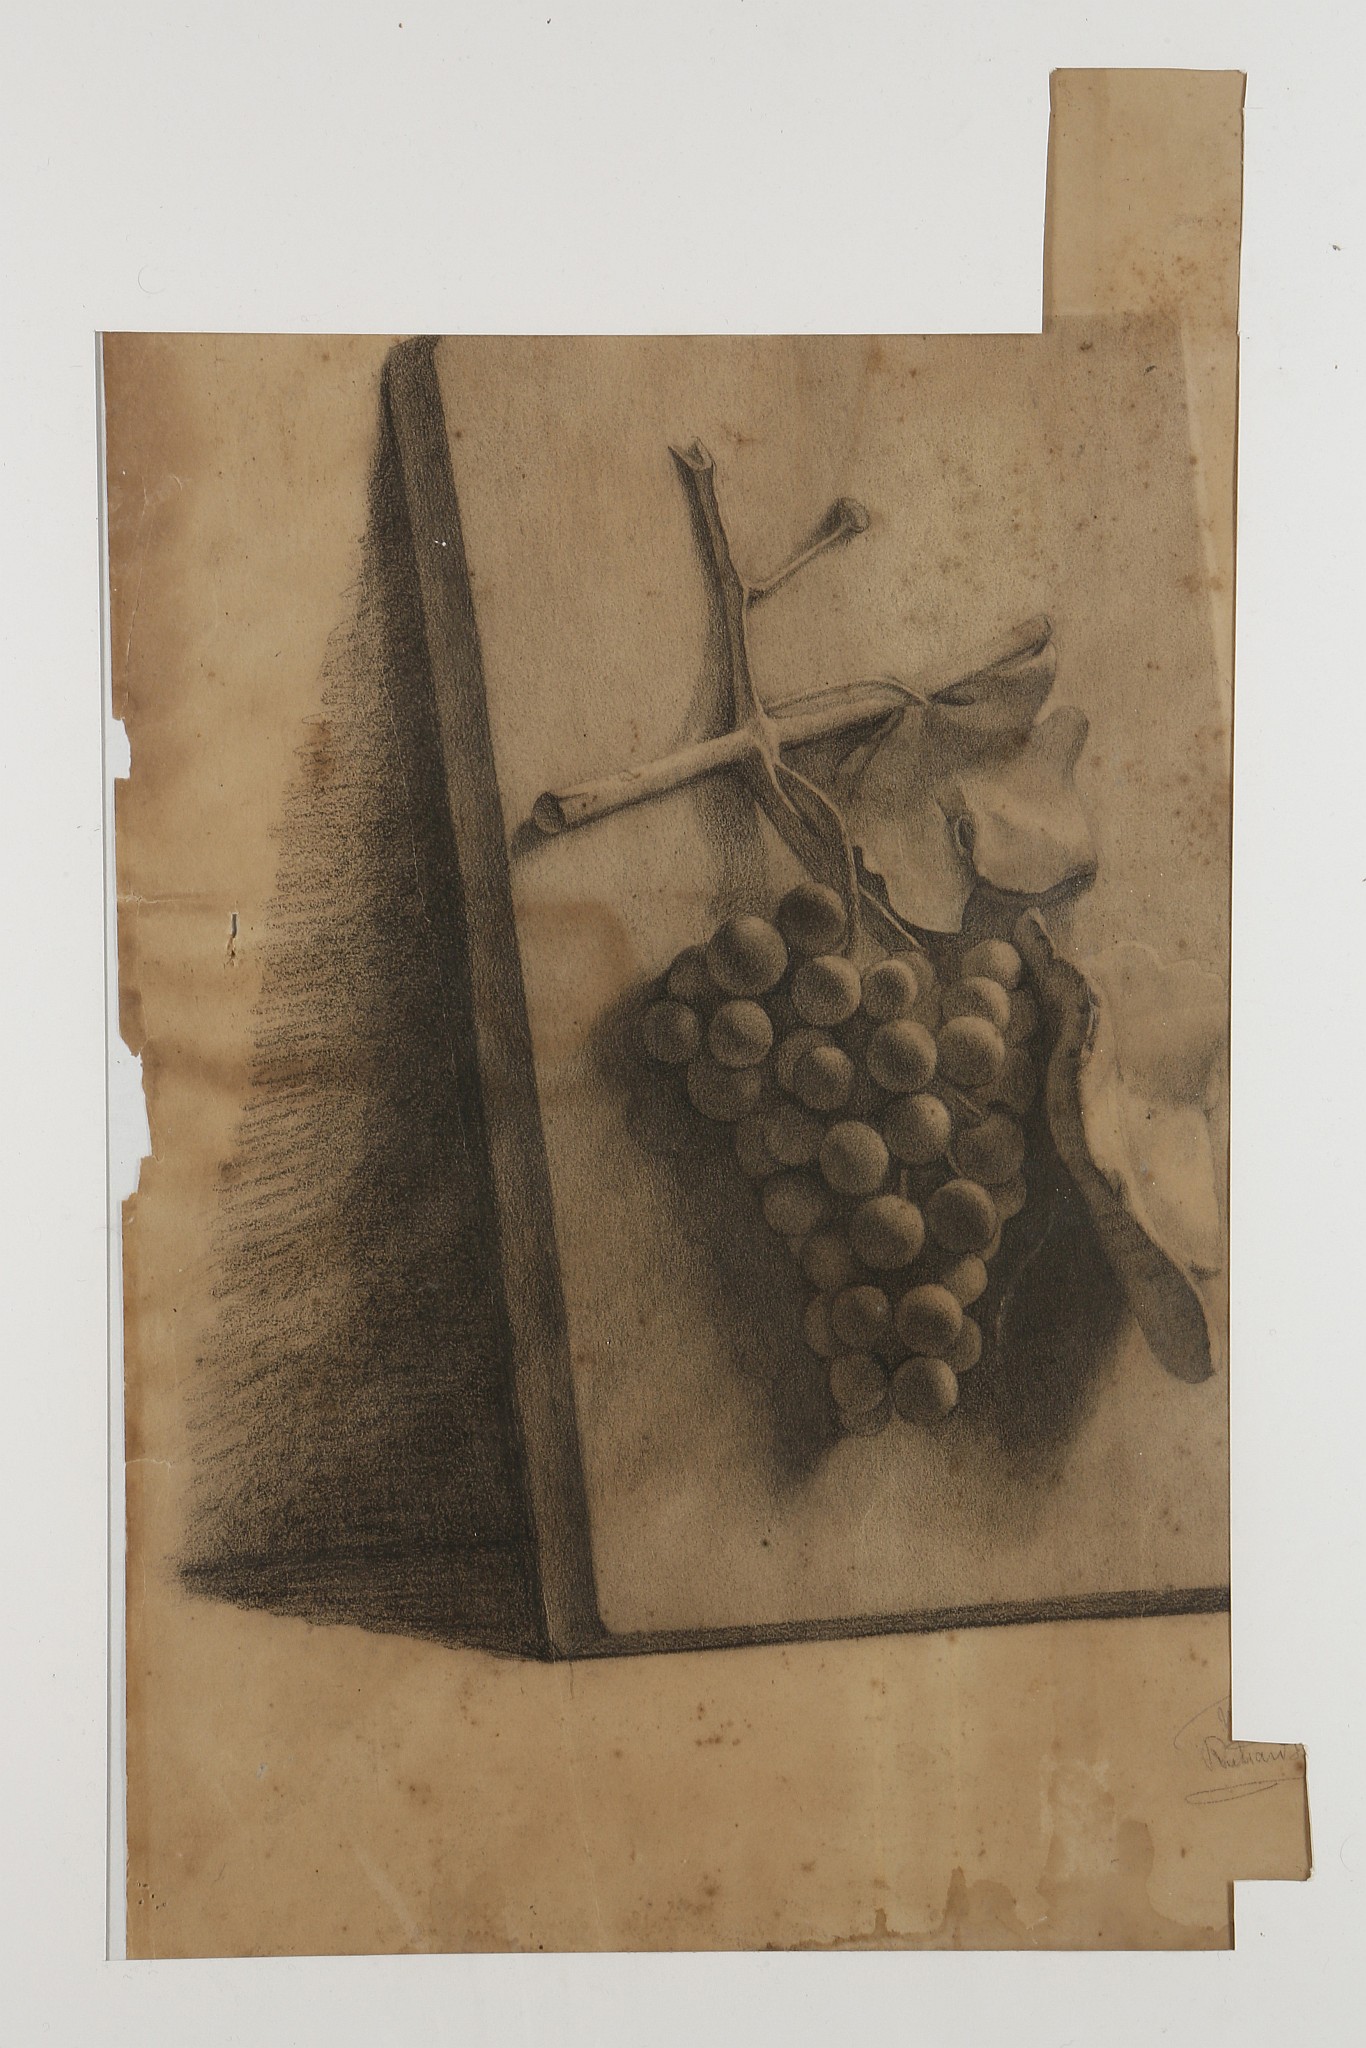 Late 19th century English school. A fine still life drawing of grapes. Inscribed to the margin.